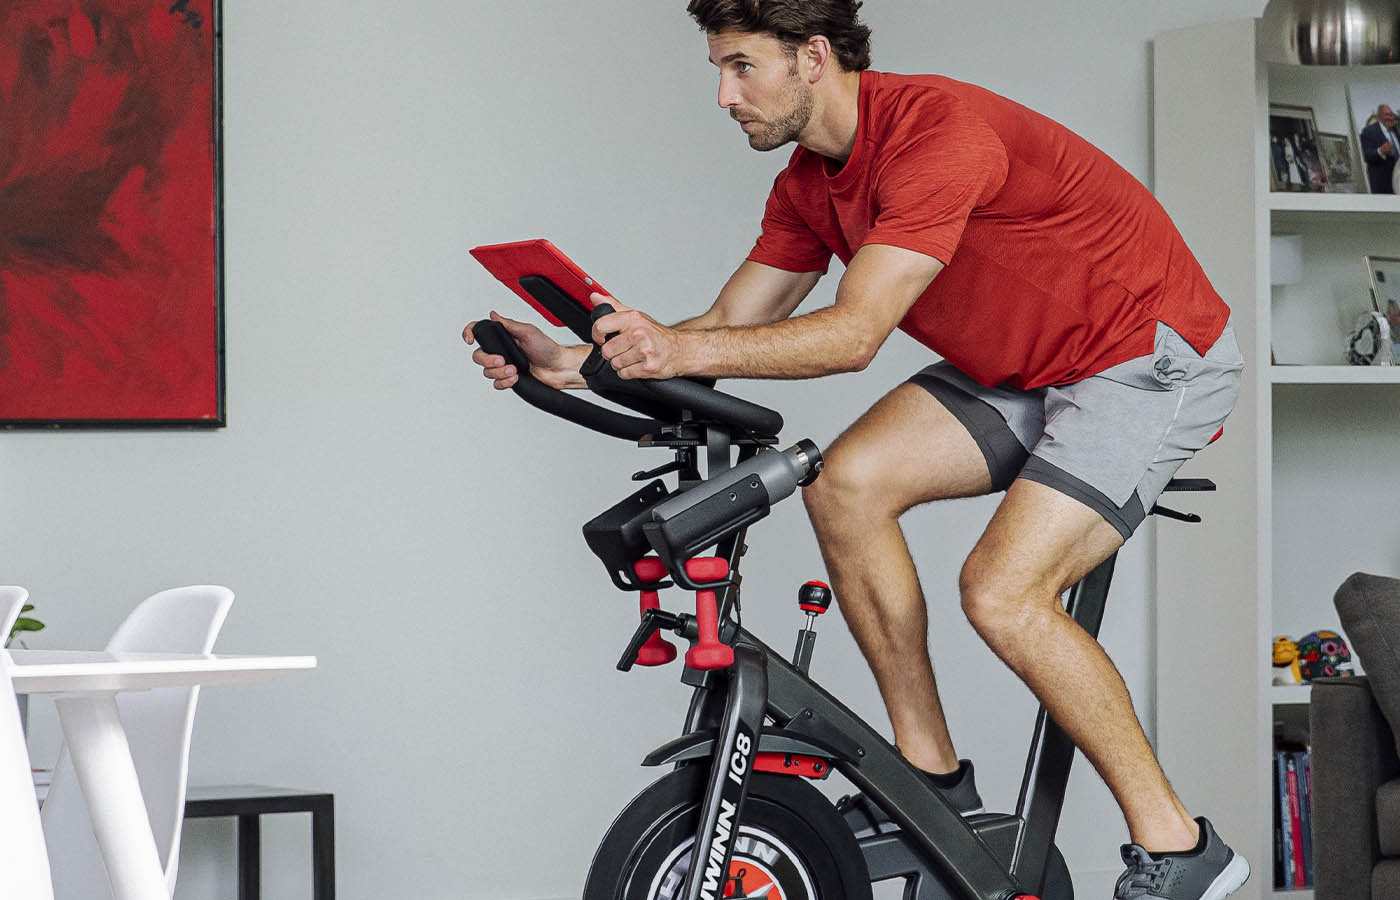 Integrating interval training is a smart way to boost strength and cardio in one session